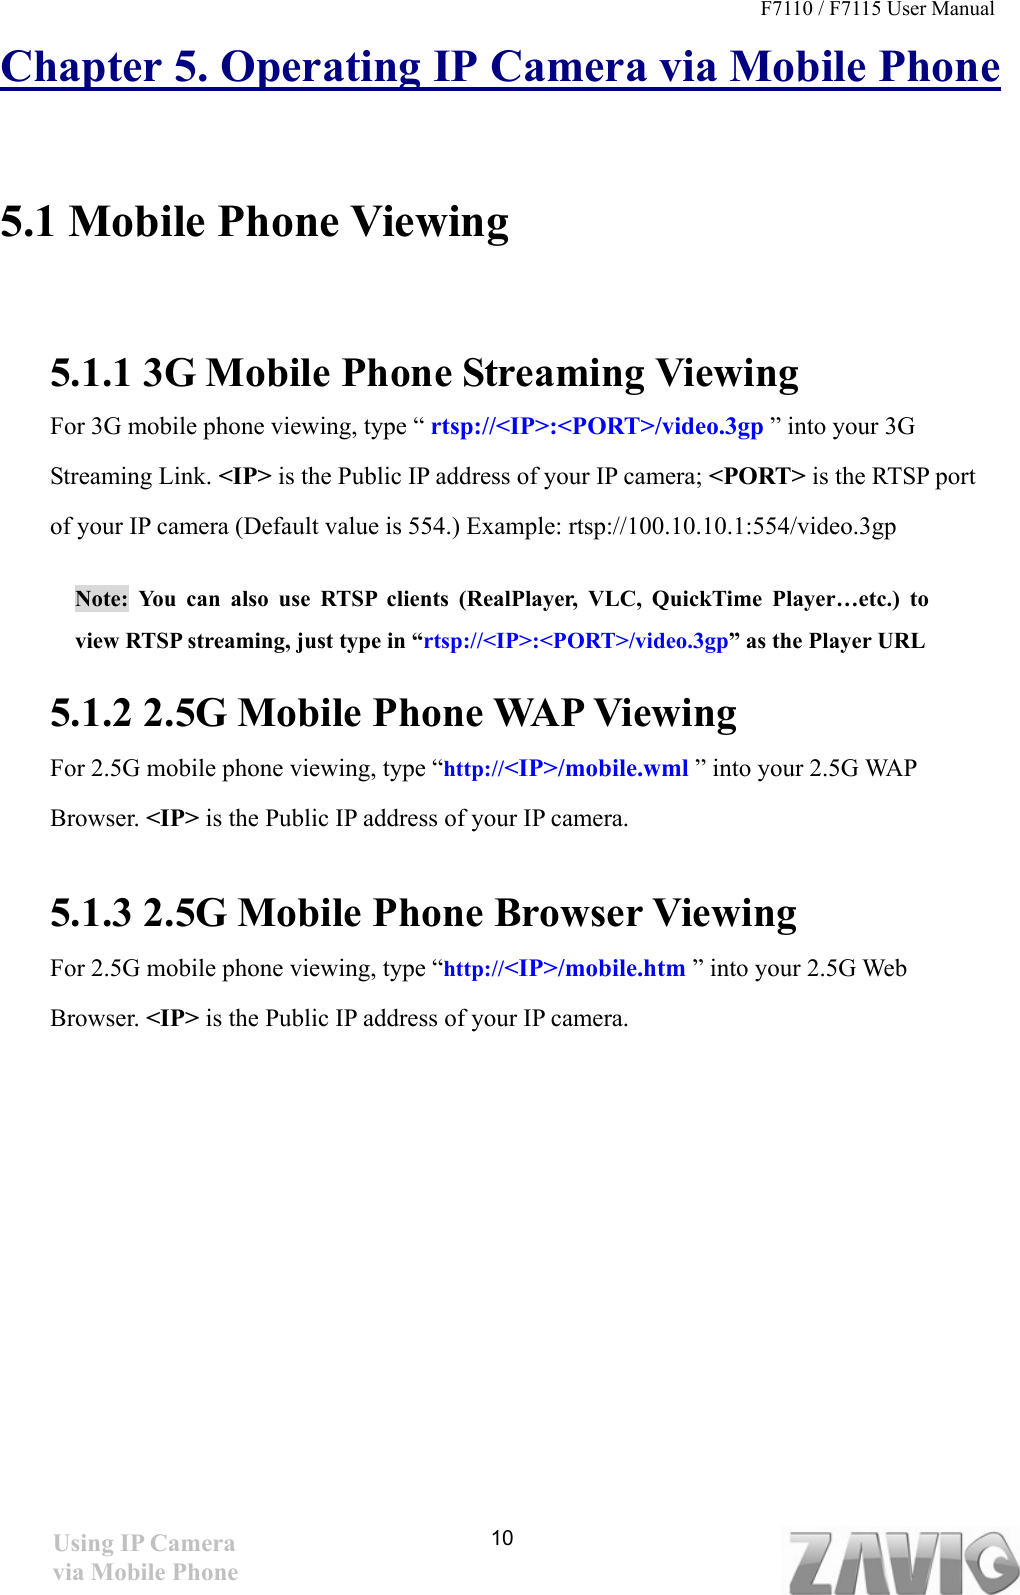 F7110 / F7115 User Manual   Chapter 5. Operating IP Camera via Mobile Phone  5.1 Mobile Phone Viewing      5.1.1 3G Mobile Phone Streaming Viewing   For 3G mobile phone viewing, type “ rtsp://&lt;IP&gt;:&lt;PORT&gt;/video.3gp ” into your 3G Streaming Link. &lt;IP&gt; is the Public IP address of your IP camera; &lt;PORT&gt; is the RTSP port of your IP camera (Default value is 554.) Example: rtsp://100.10.10.1:554/video.3gp Note: You can also use RTSP clients (RealPlayer, VLC, QuickTime Player…etc.) to view RTSP streaming, just type in “rtsp://&lt;IP&gt;:&lt;PORT&gt;/video.3gp” as the Player URL 5.1.2 2.5G Mobile Phone WAP Viewing   For 2.5G mobile phone viewing, type “http://&lt;IP&gt;/mobile.wml ” into your 2.5G WAP Browser. &lt;IP&gt; is the Public IP address of your IP camera.  5.1.3 2.5G Mobile Phone Browser Viewing  For 2.5G mobile phone viewing, type “http://&lt;IP&gt;/mobile.htm ” into your 2.5G Web Browser. &lt;IP&gt; is the Public IP address of your IP camera.         10Using IP Camera via Mobile Phone 